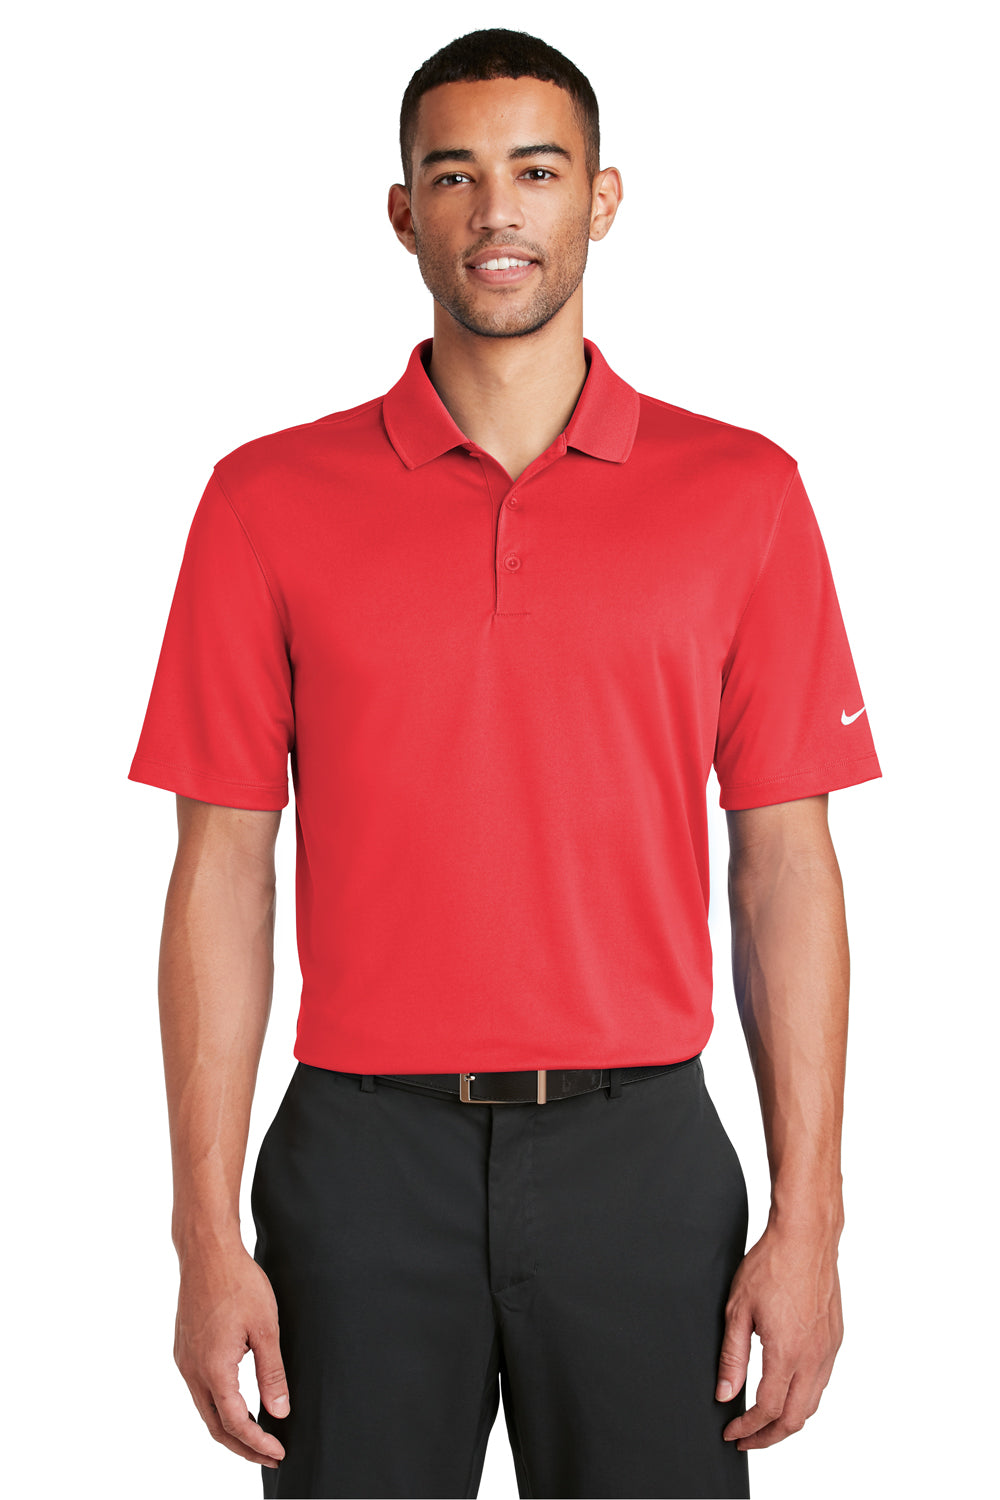 Nike 838956 Mens Players Dri-Fit Moisture Wicking Short Sleeve Polo Shirt University Red Model Front